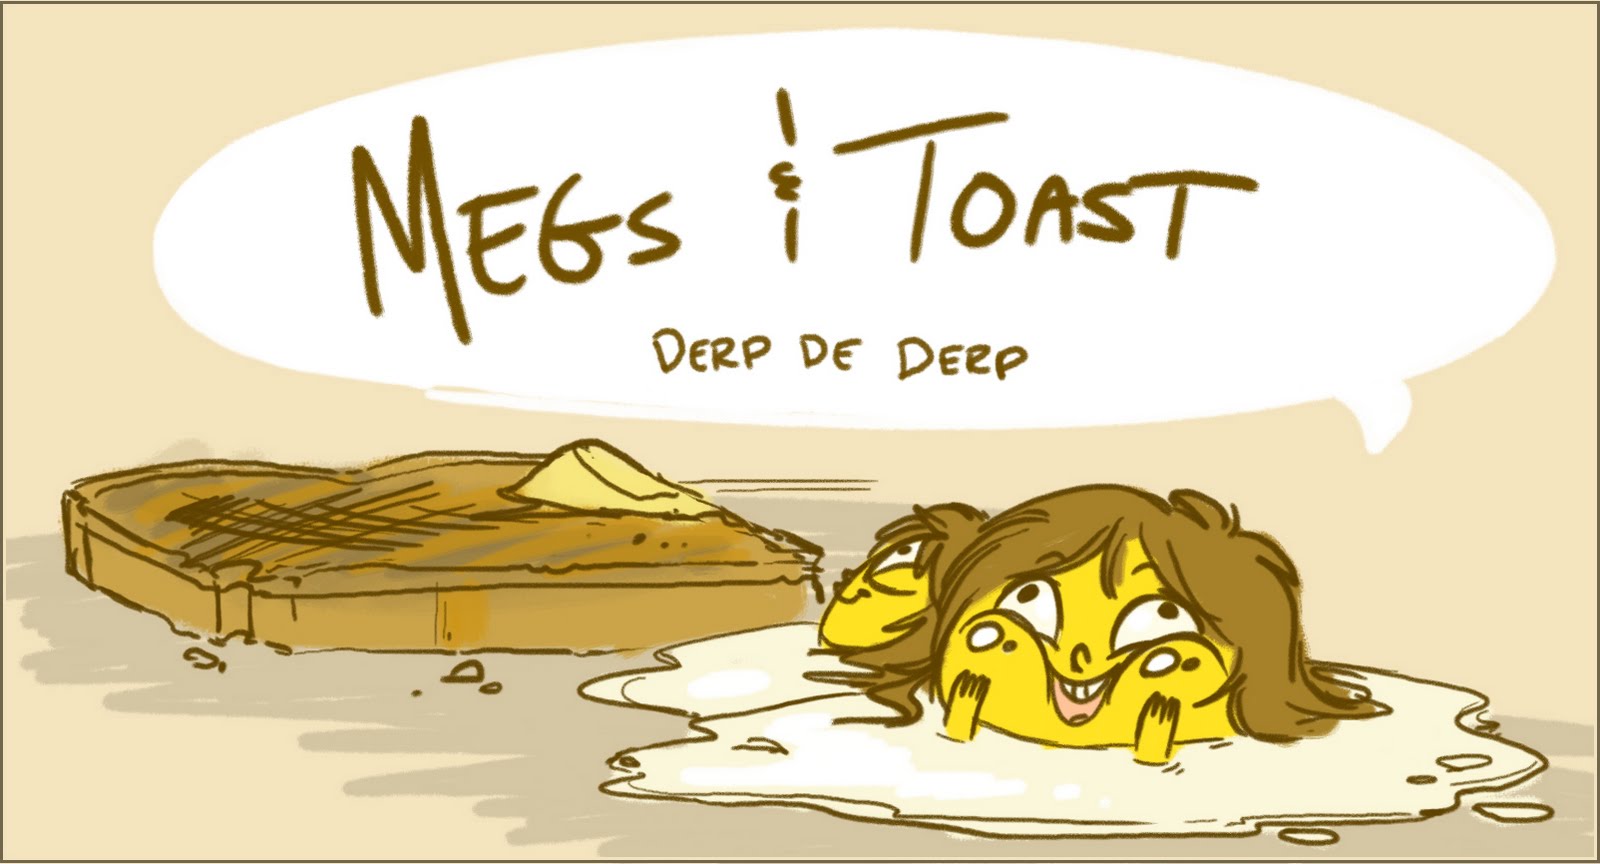 Megs and Toast